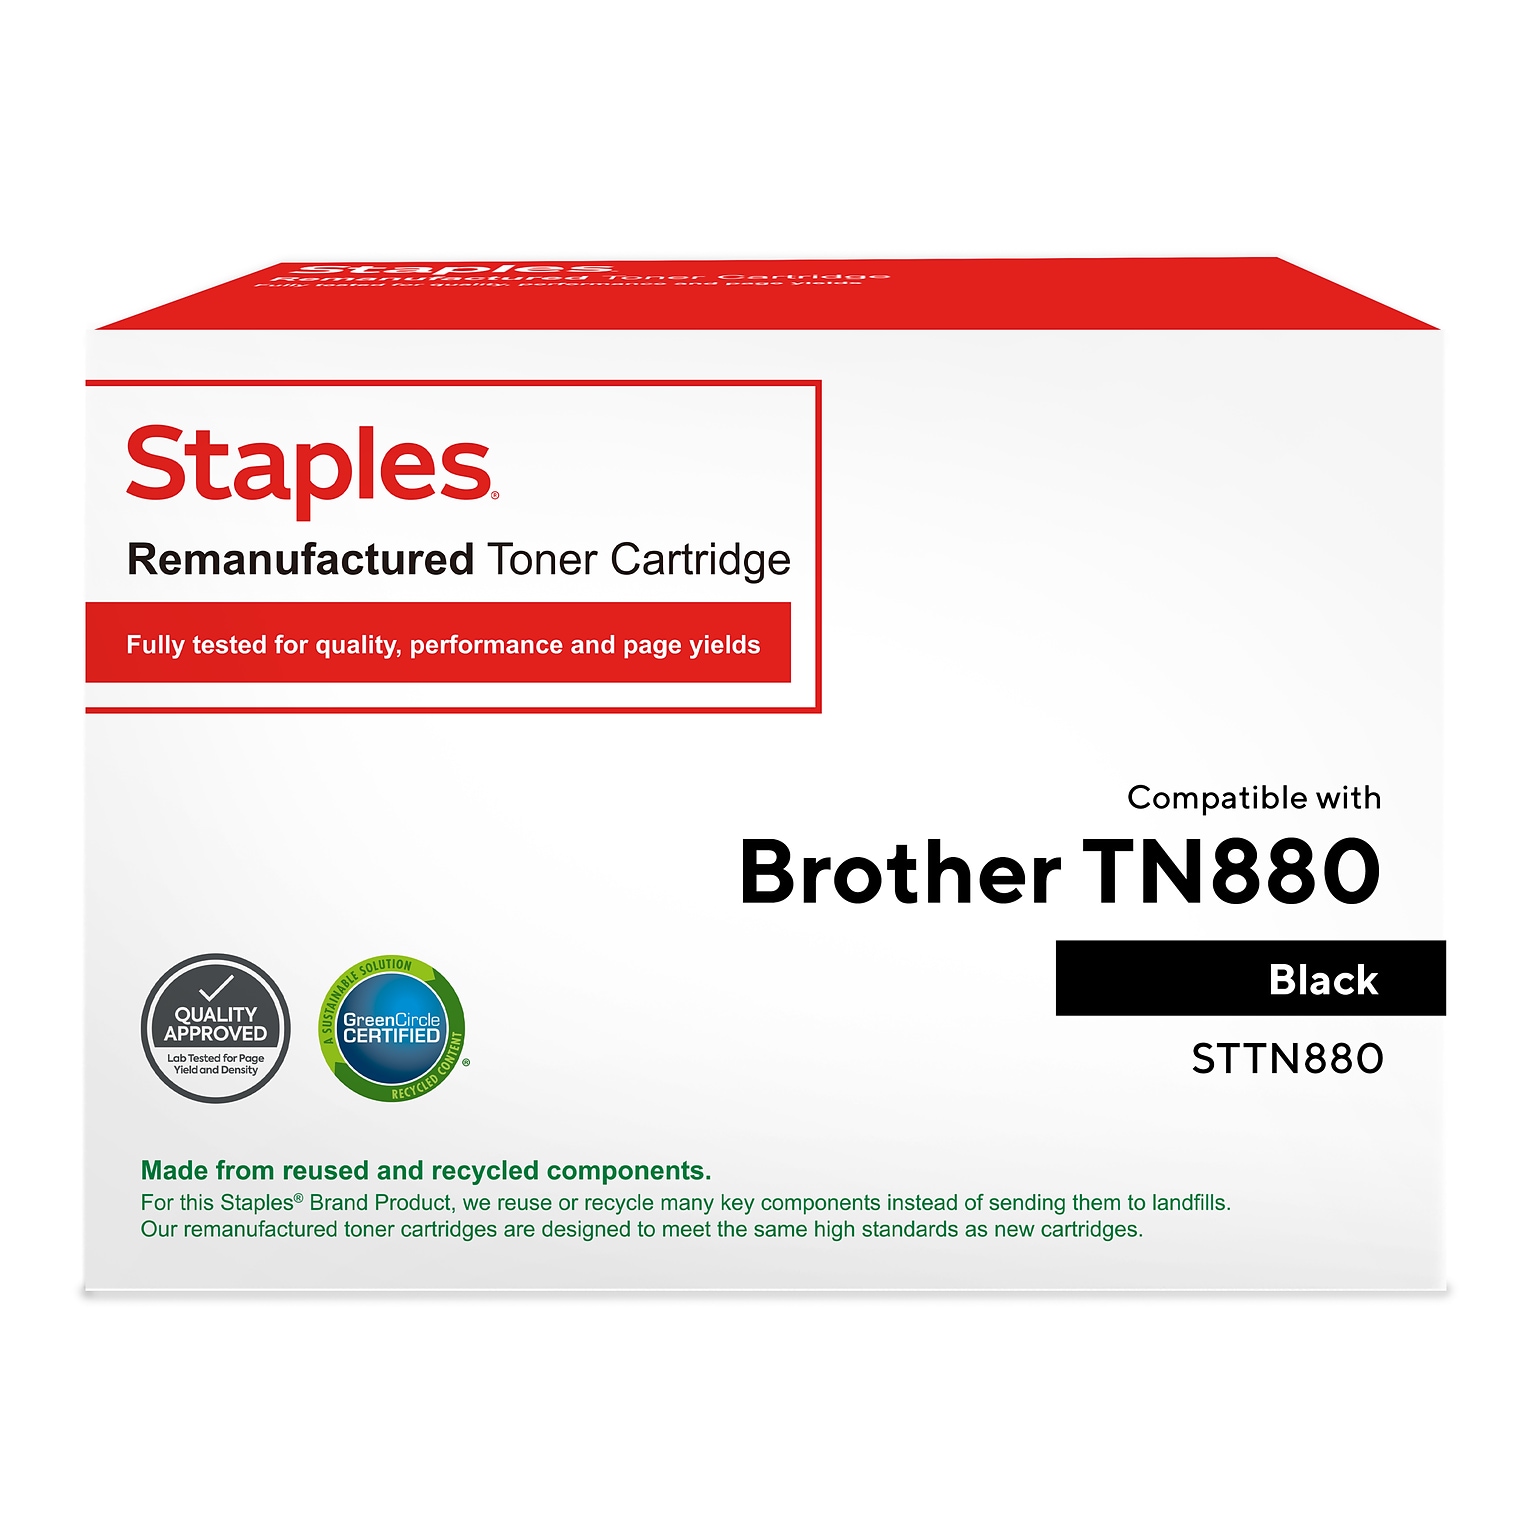 Staples Remanufactured Black Extra High Yield Toner Cartridge Replacement for Brother TN880 (STTN880)